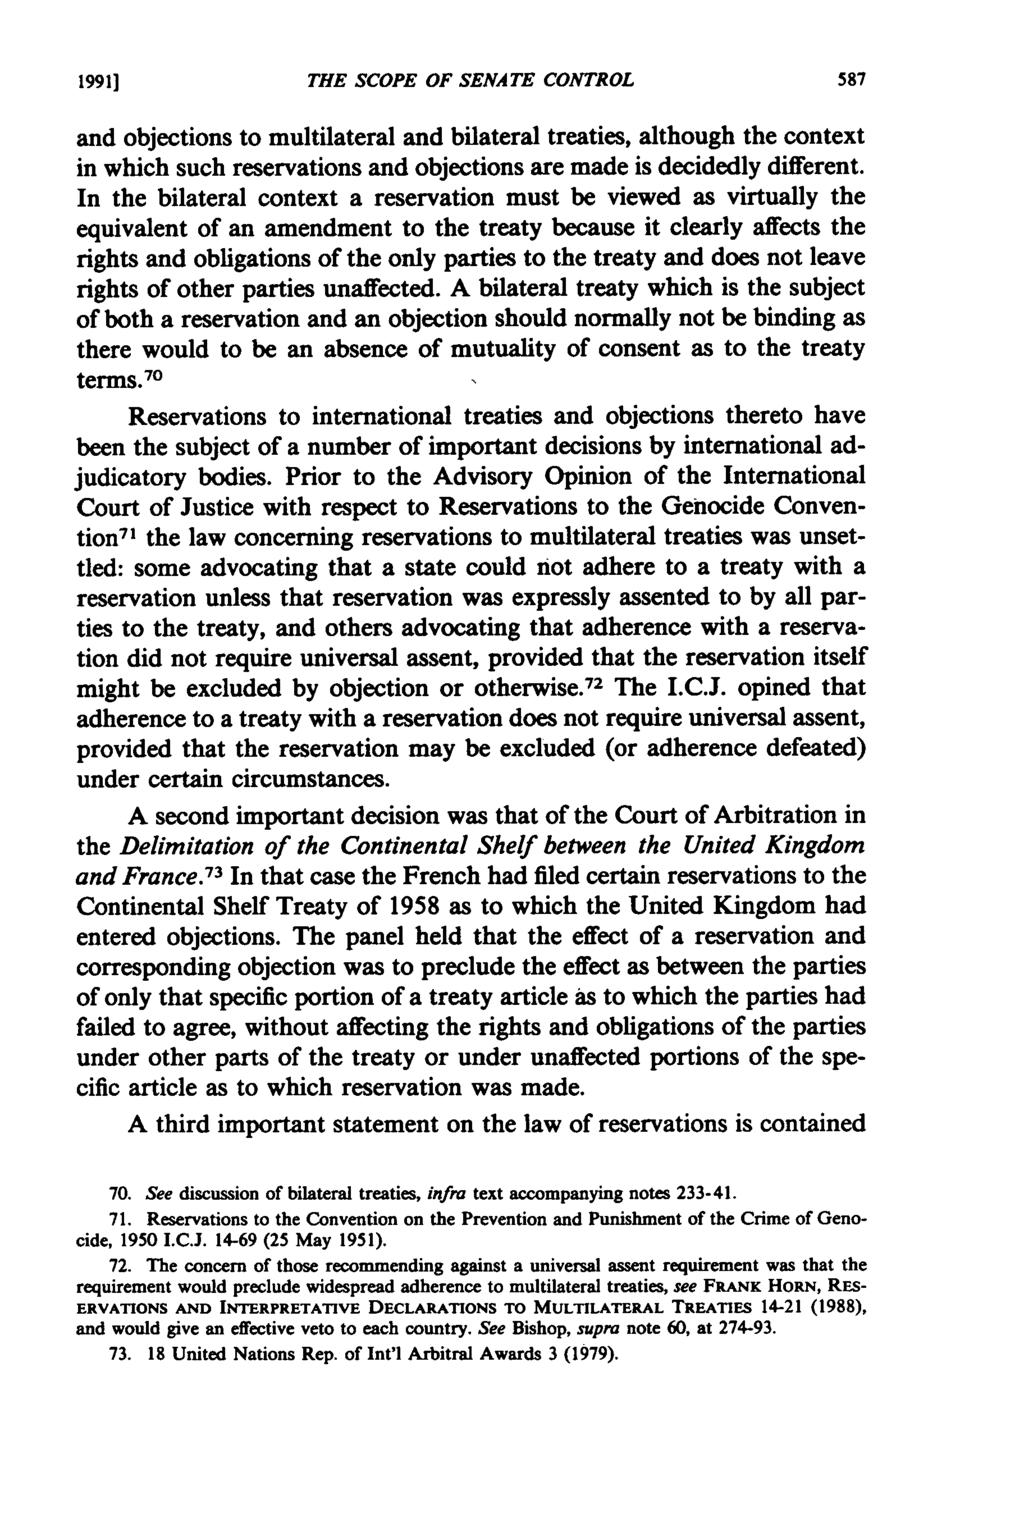 1991] THE SCOPE OF SENATE CONTROL and objections to multilateral and bilateral treaties, although the context in which such reservations and objections are made is decidedly different.